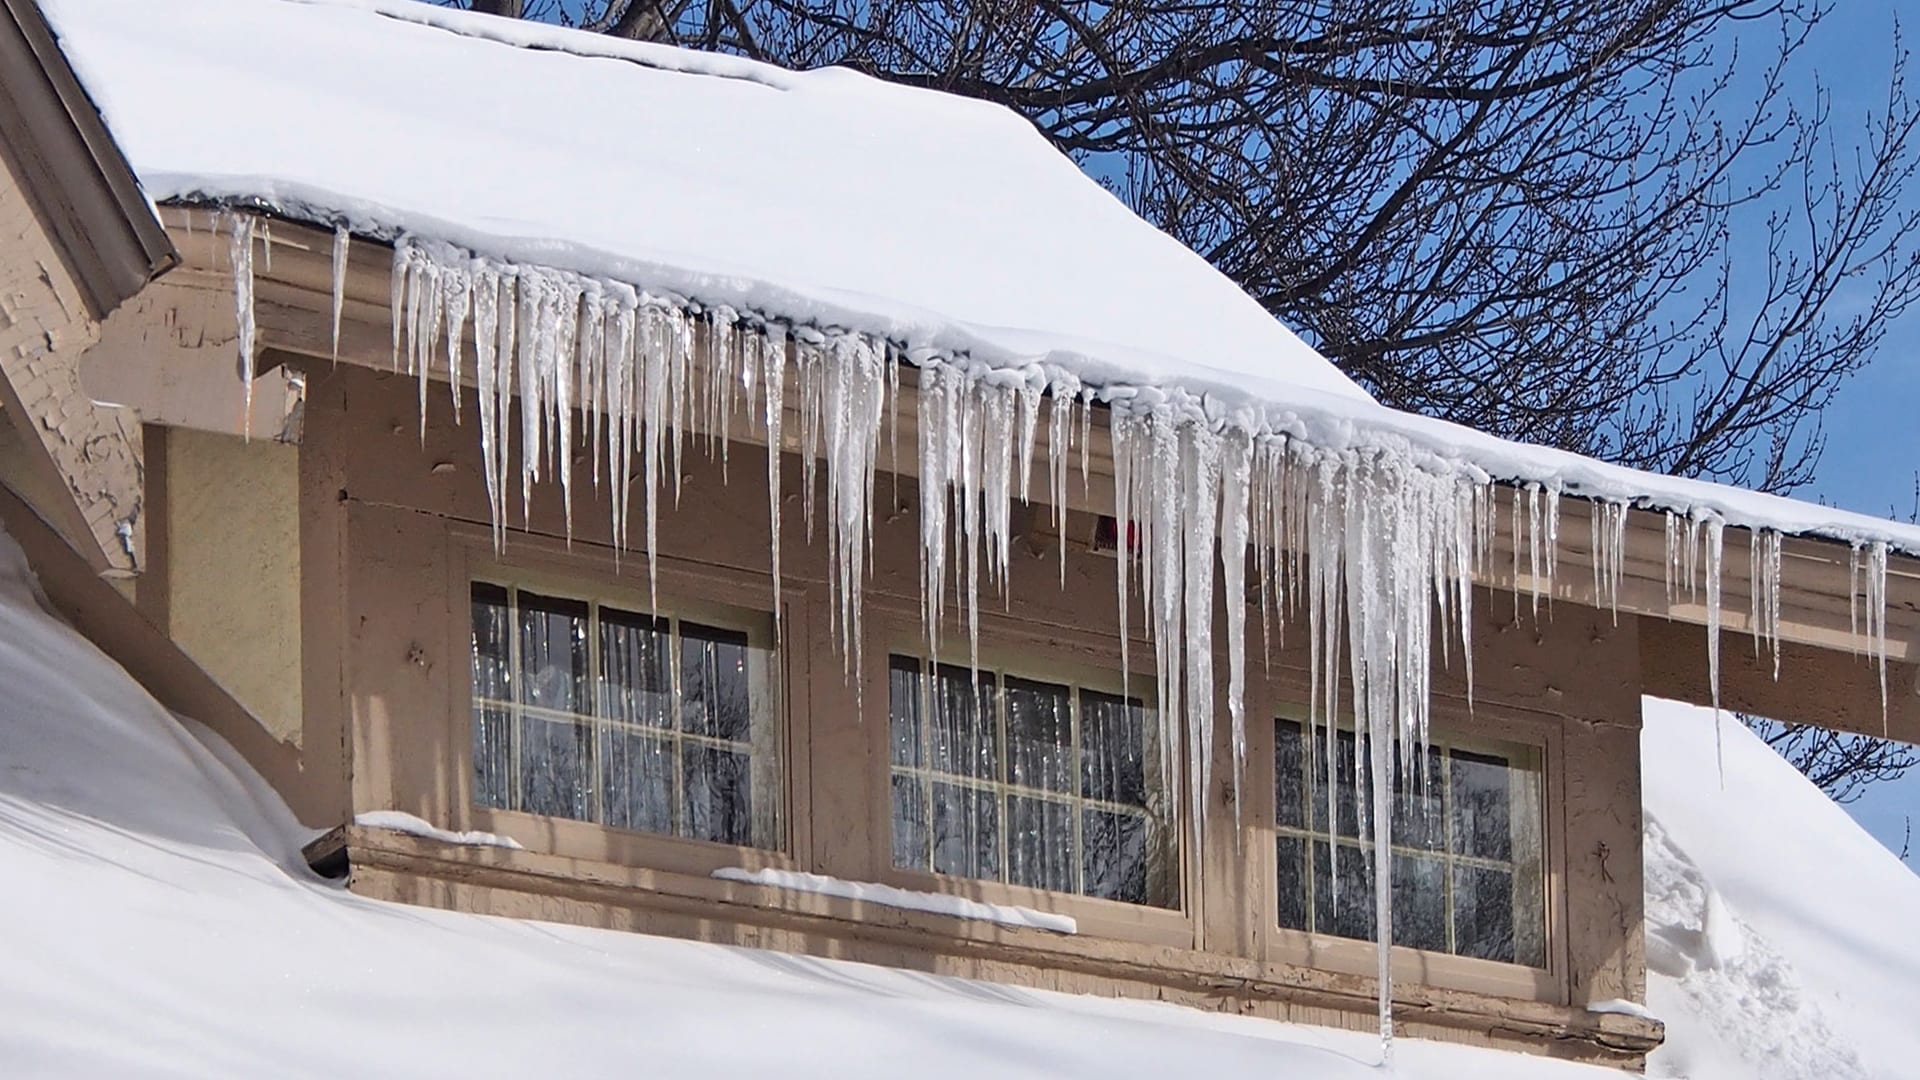 snow covered roof with icicles formed over eave